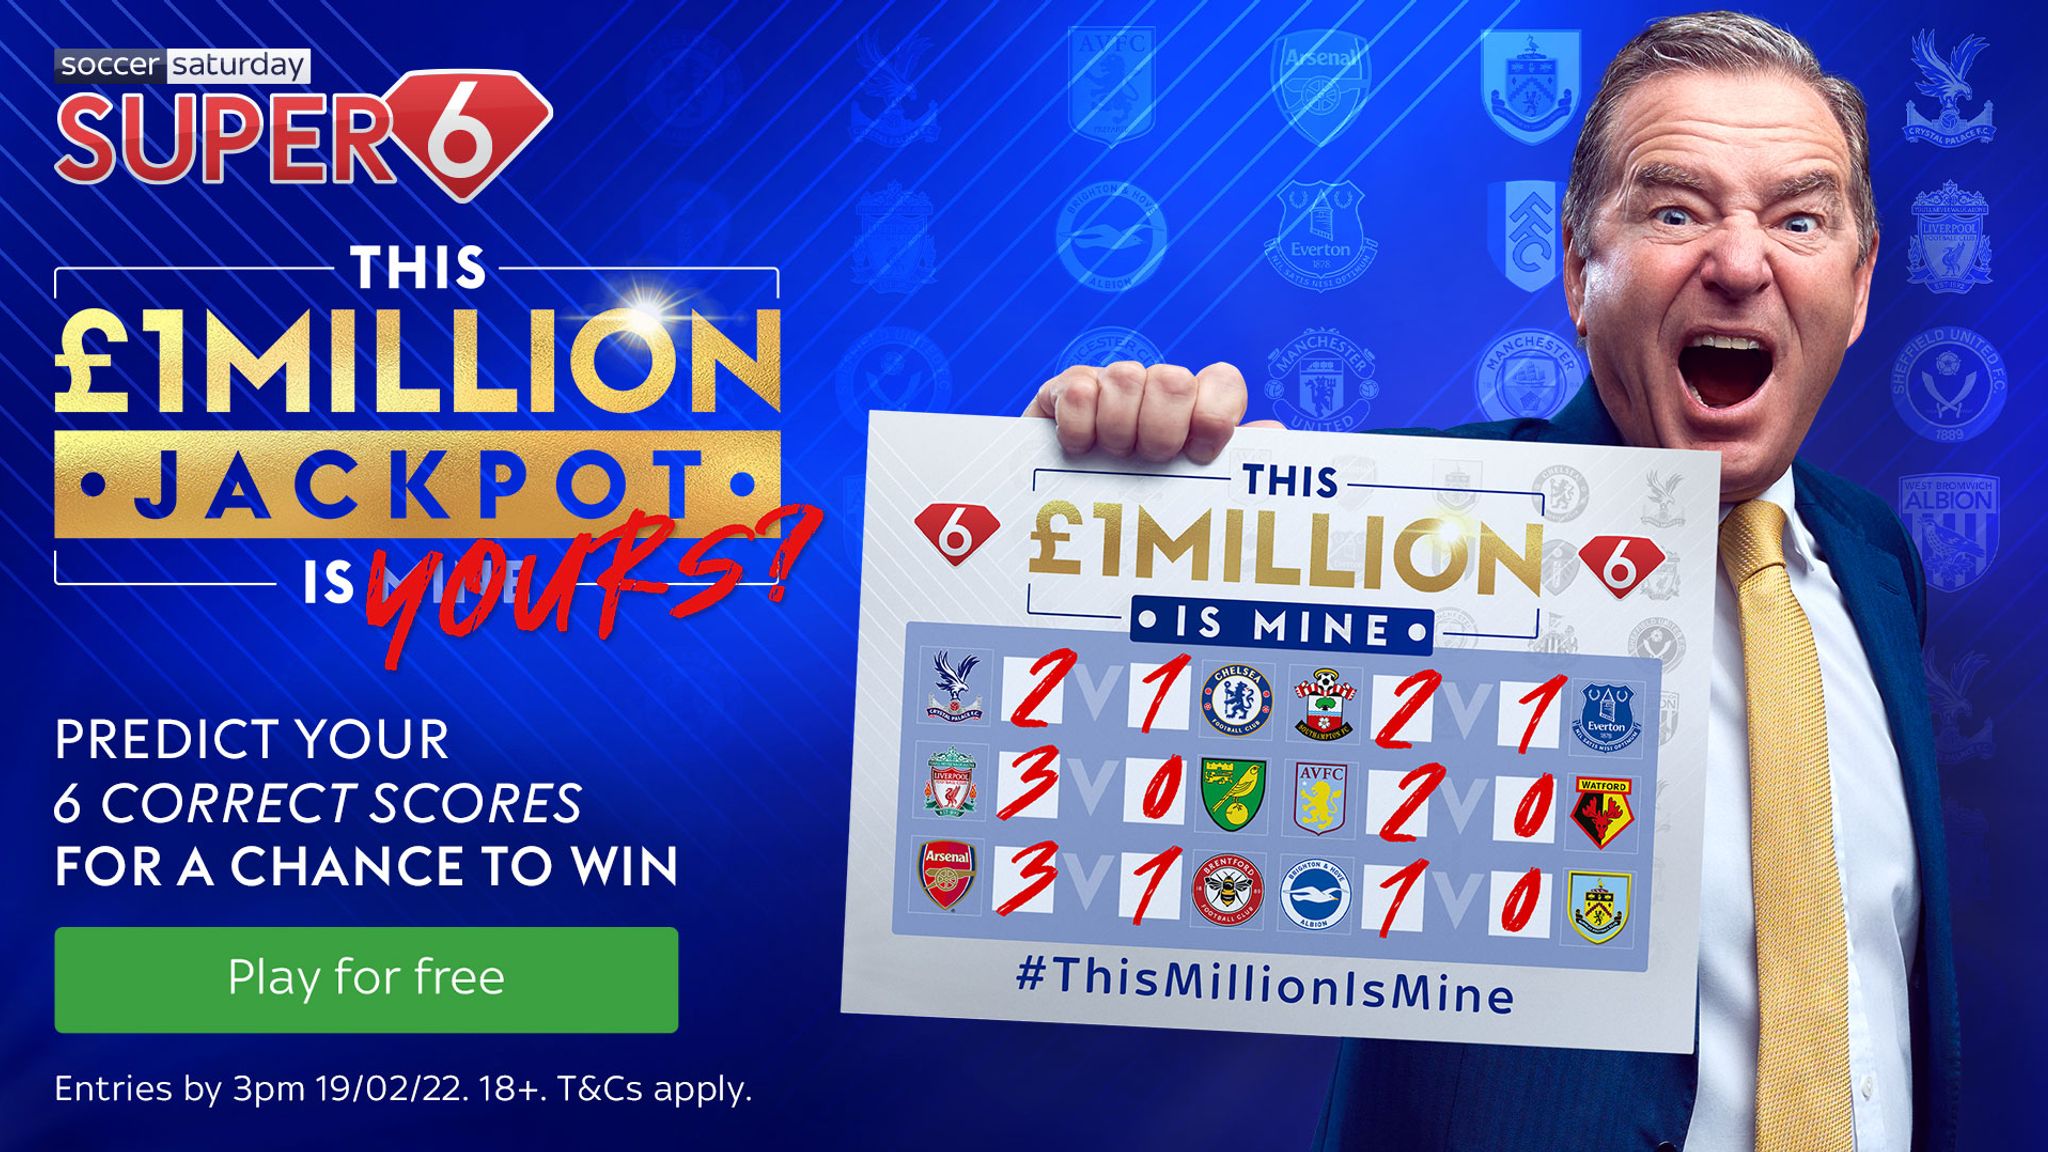 The Super 6 £1,000,000 jackpot returns for one week only. Enter for free by 3pm Saturday.